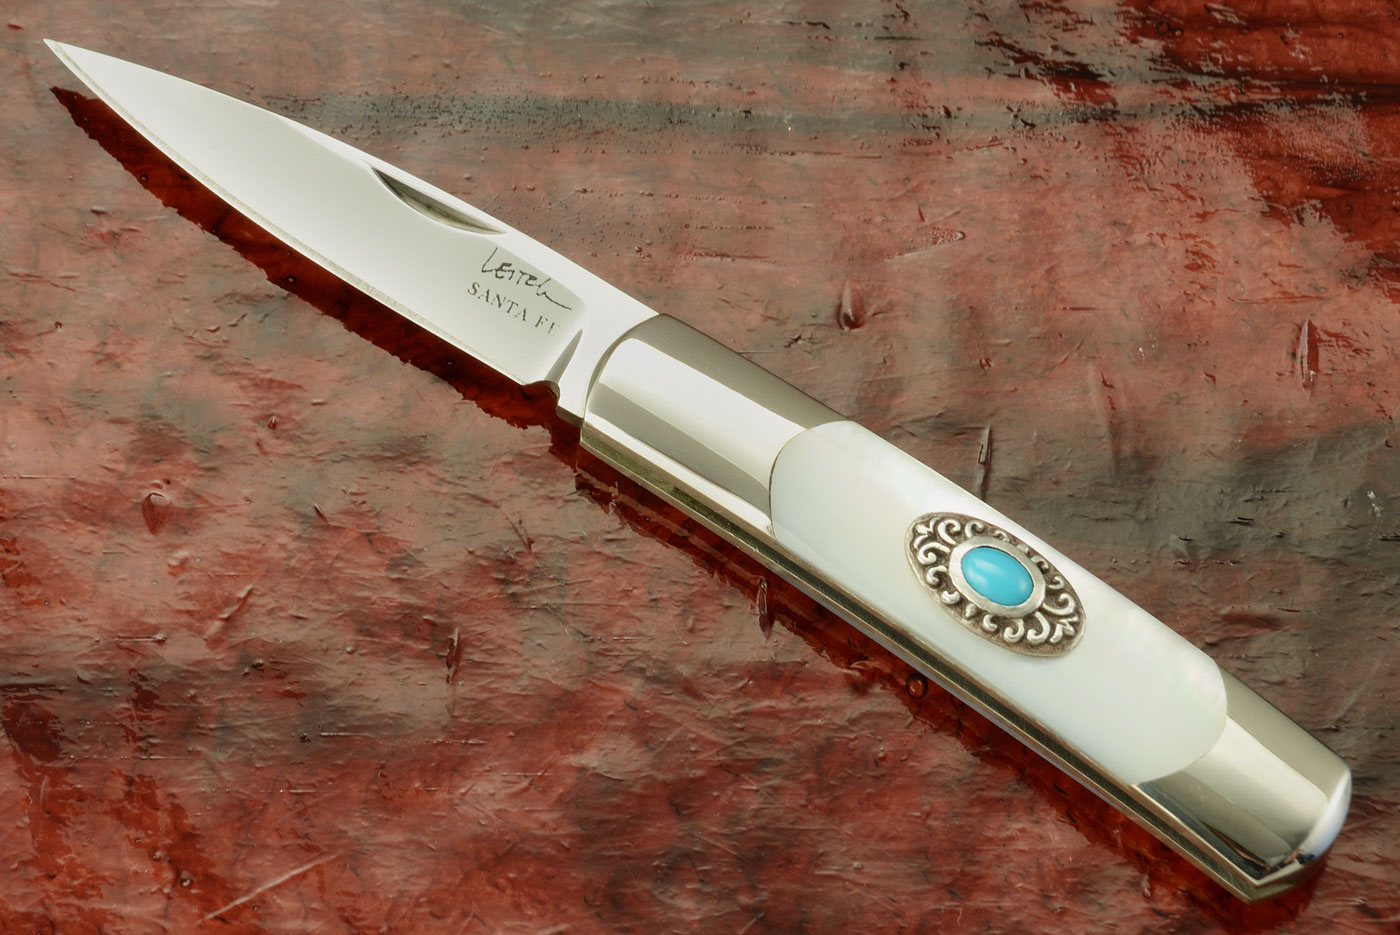 Acero Slipjoint with Mother of Pearl and Turquoise